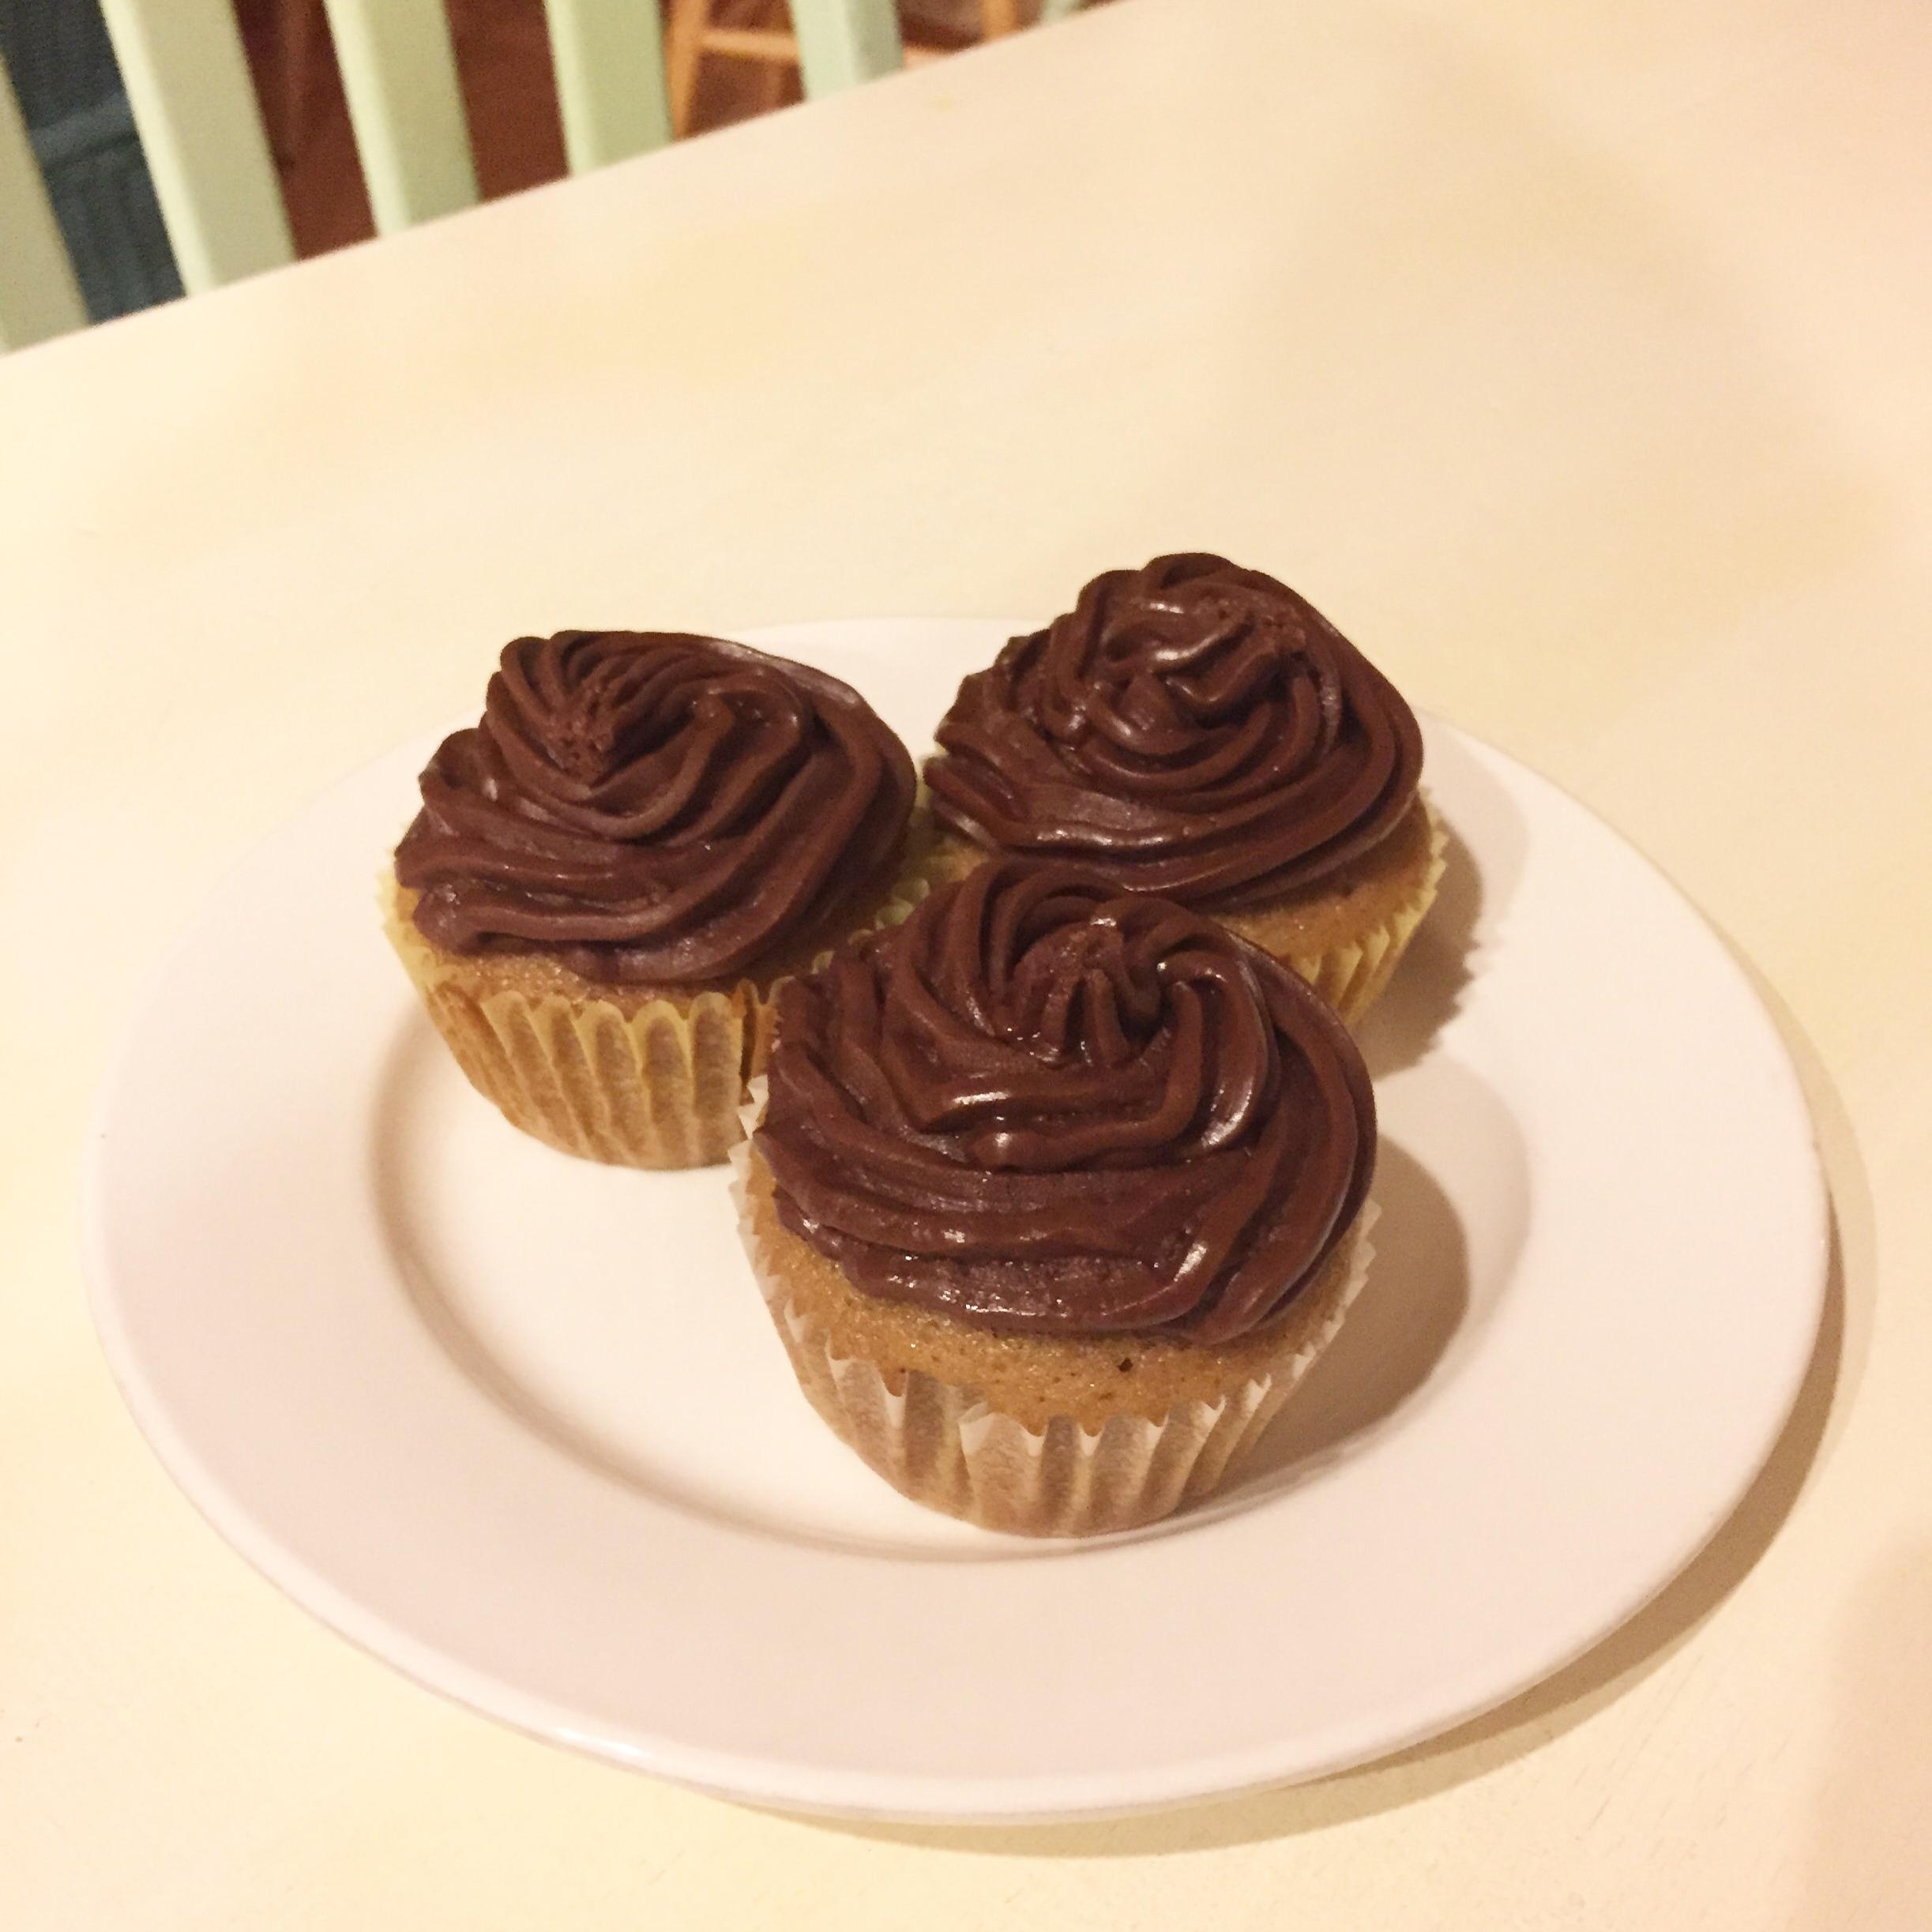  Indulge in a rich and chocolatey treat with these Mocha Cupcakes!